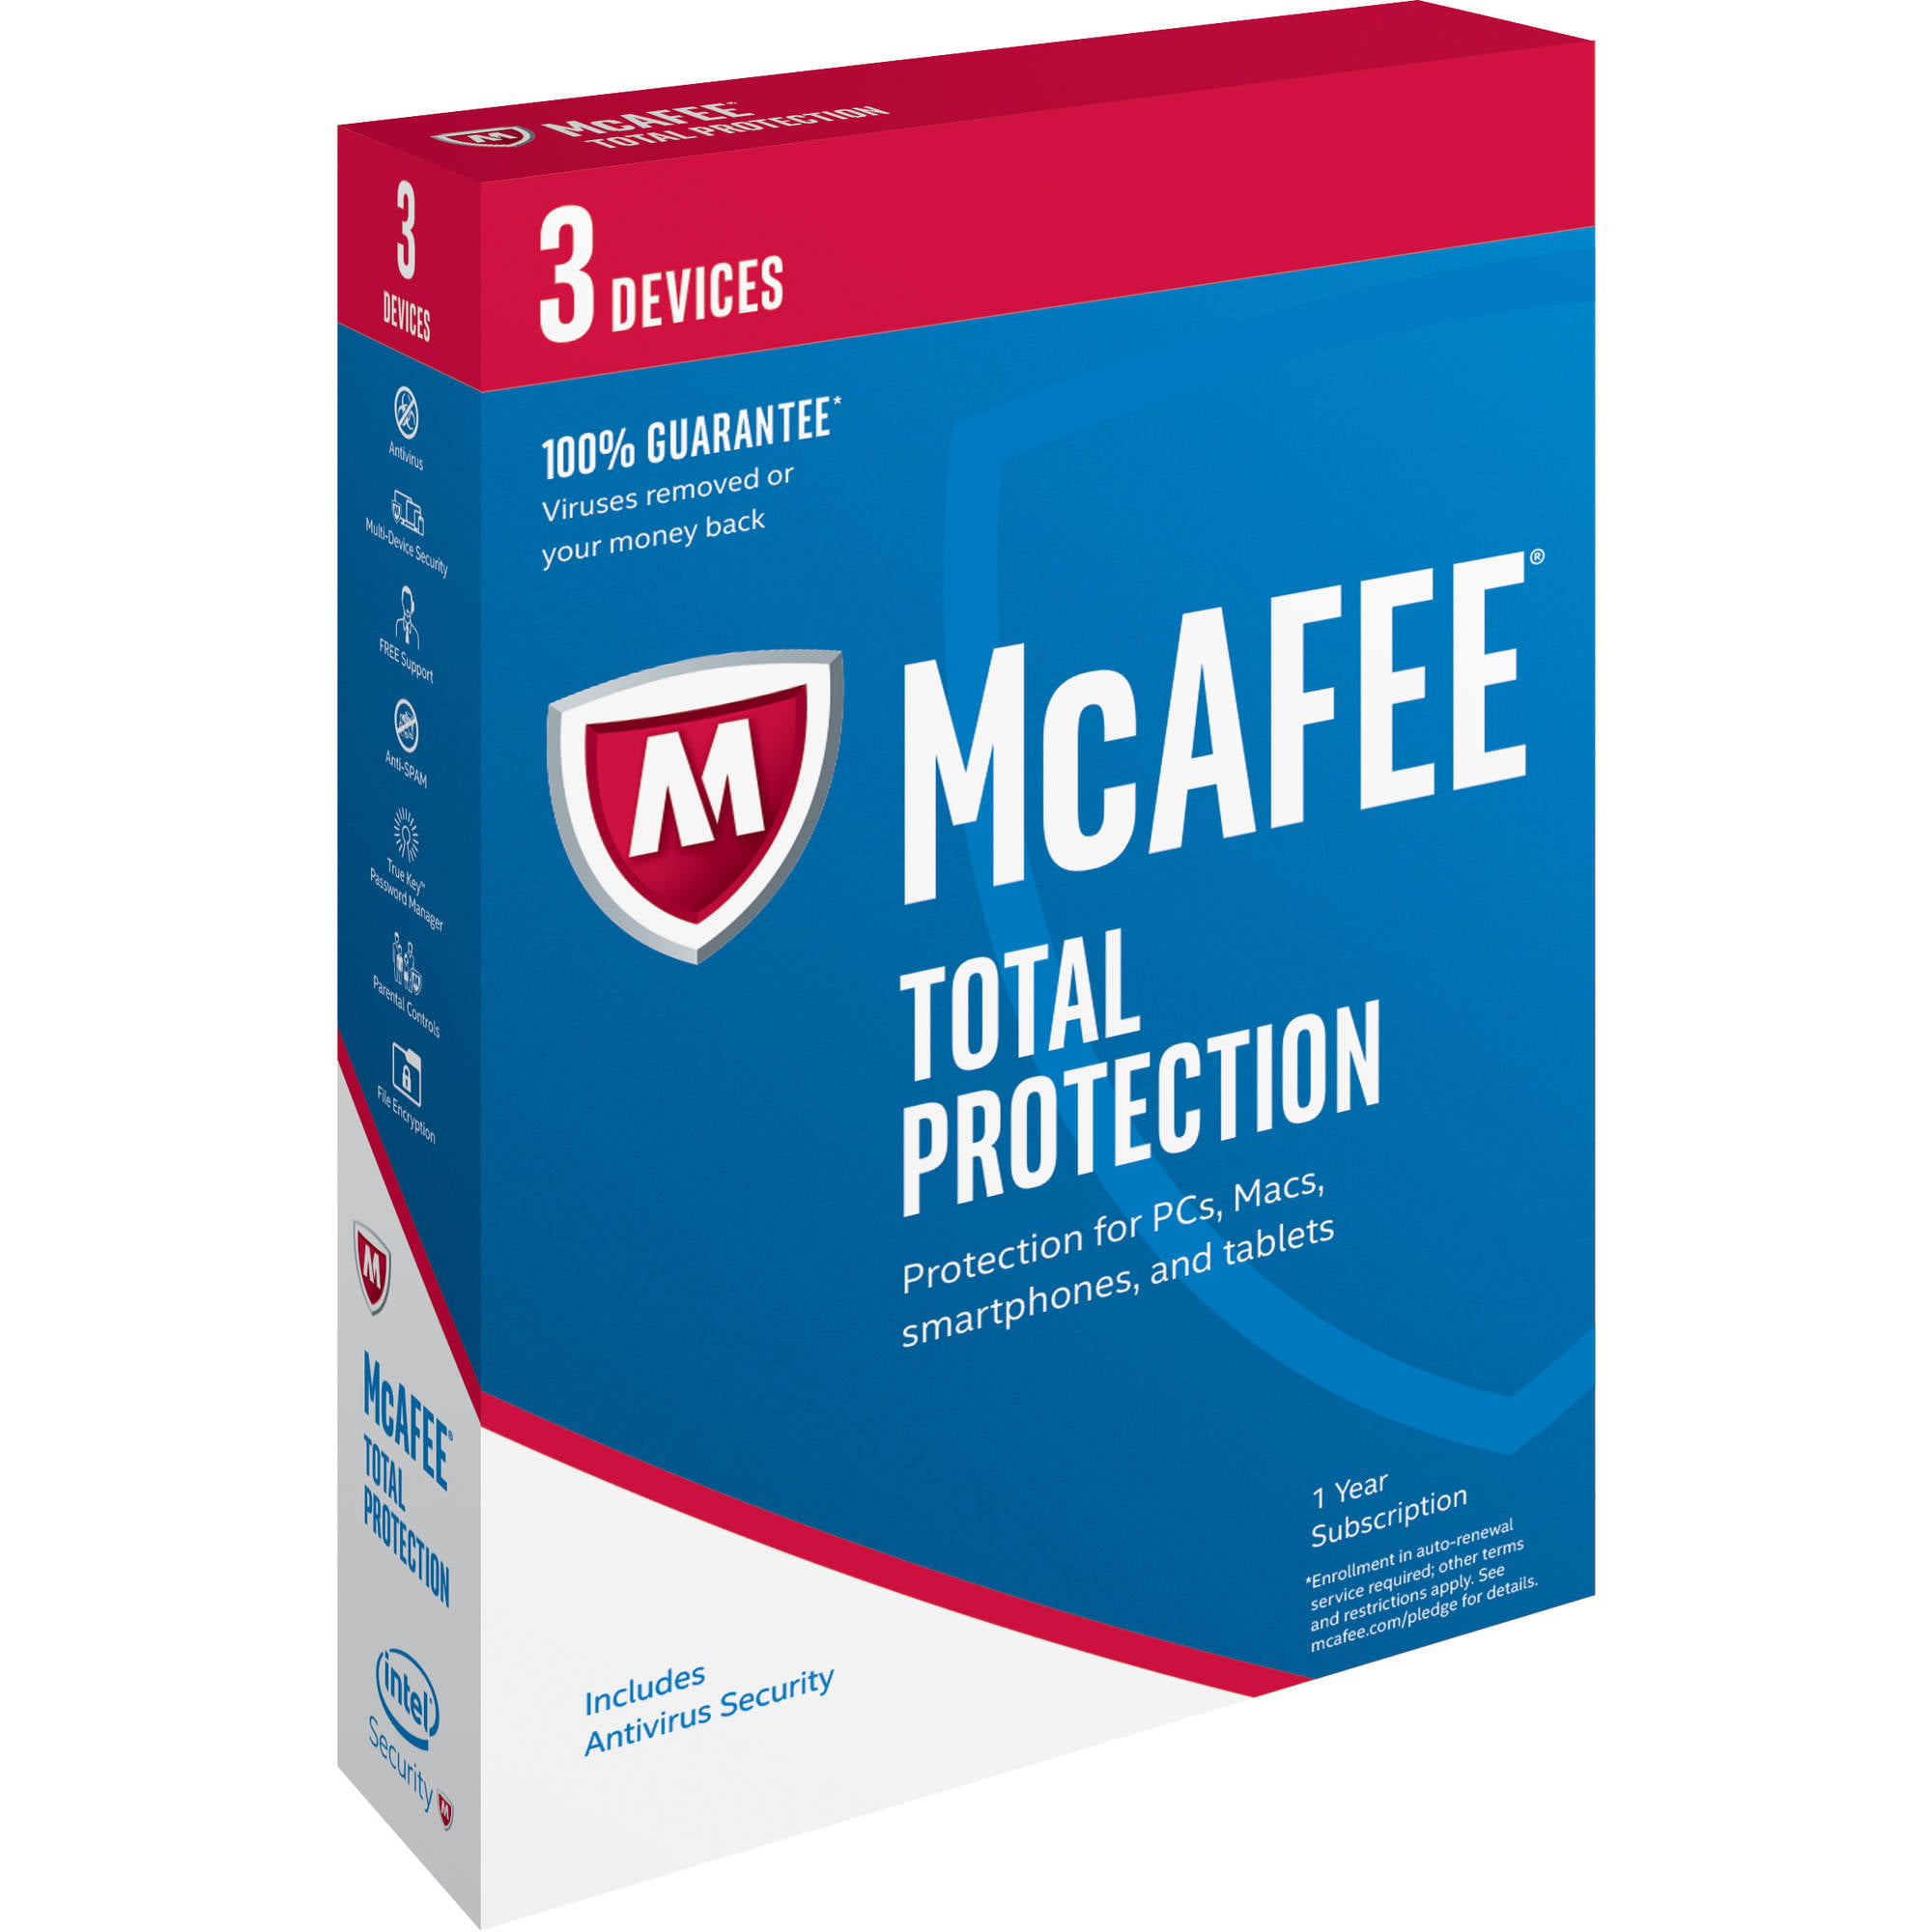 mcafee 5 device protection